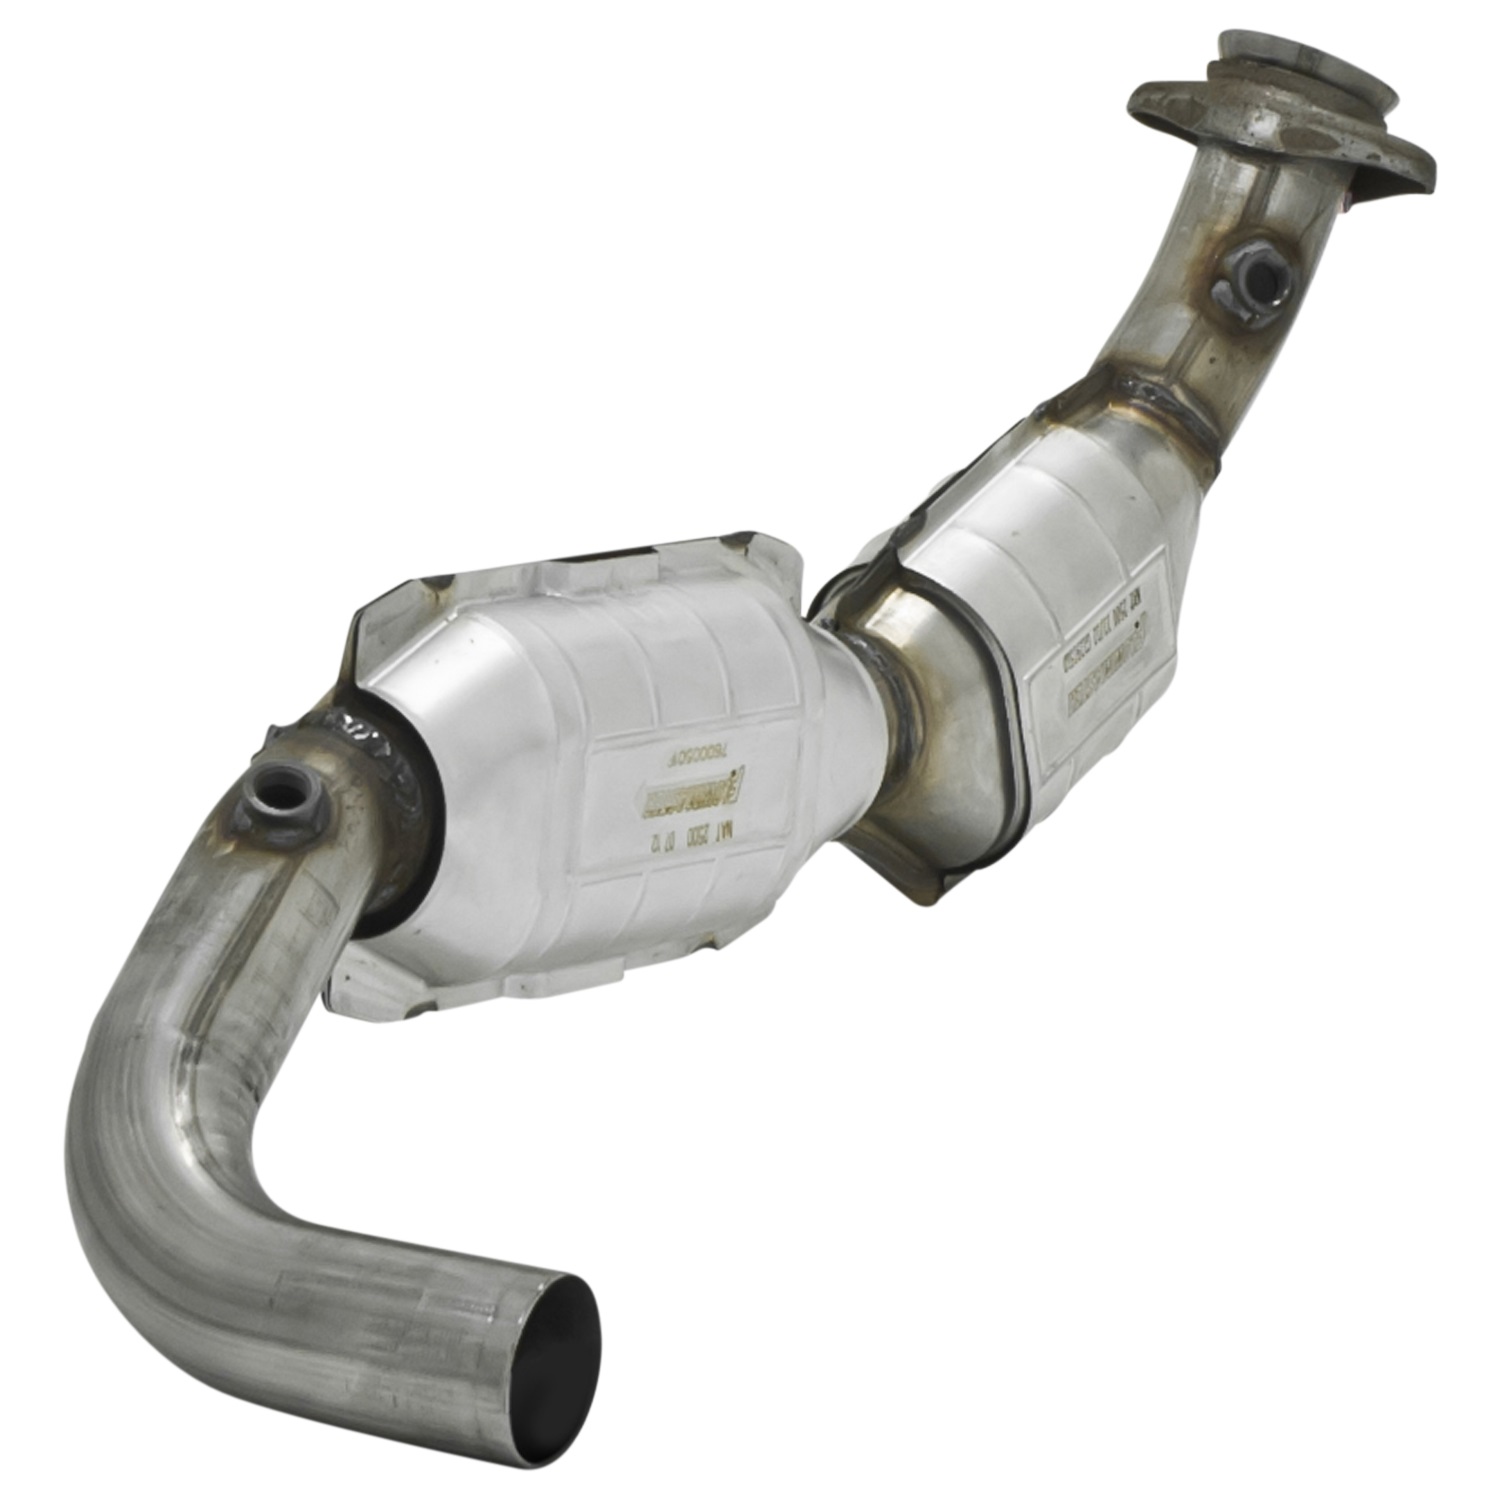 Flowmaster Flowmaster 2020014 Direct Fit Catalytic Converter Fits 97-00 Expedition F-150